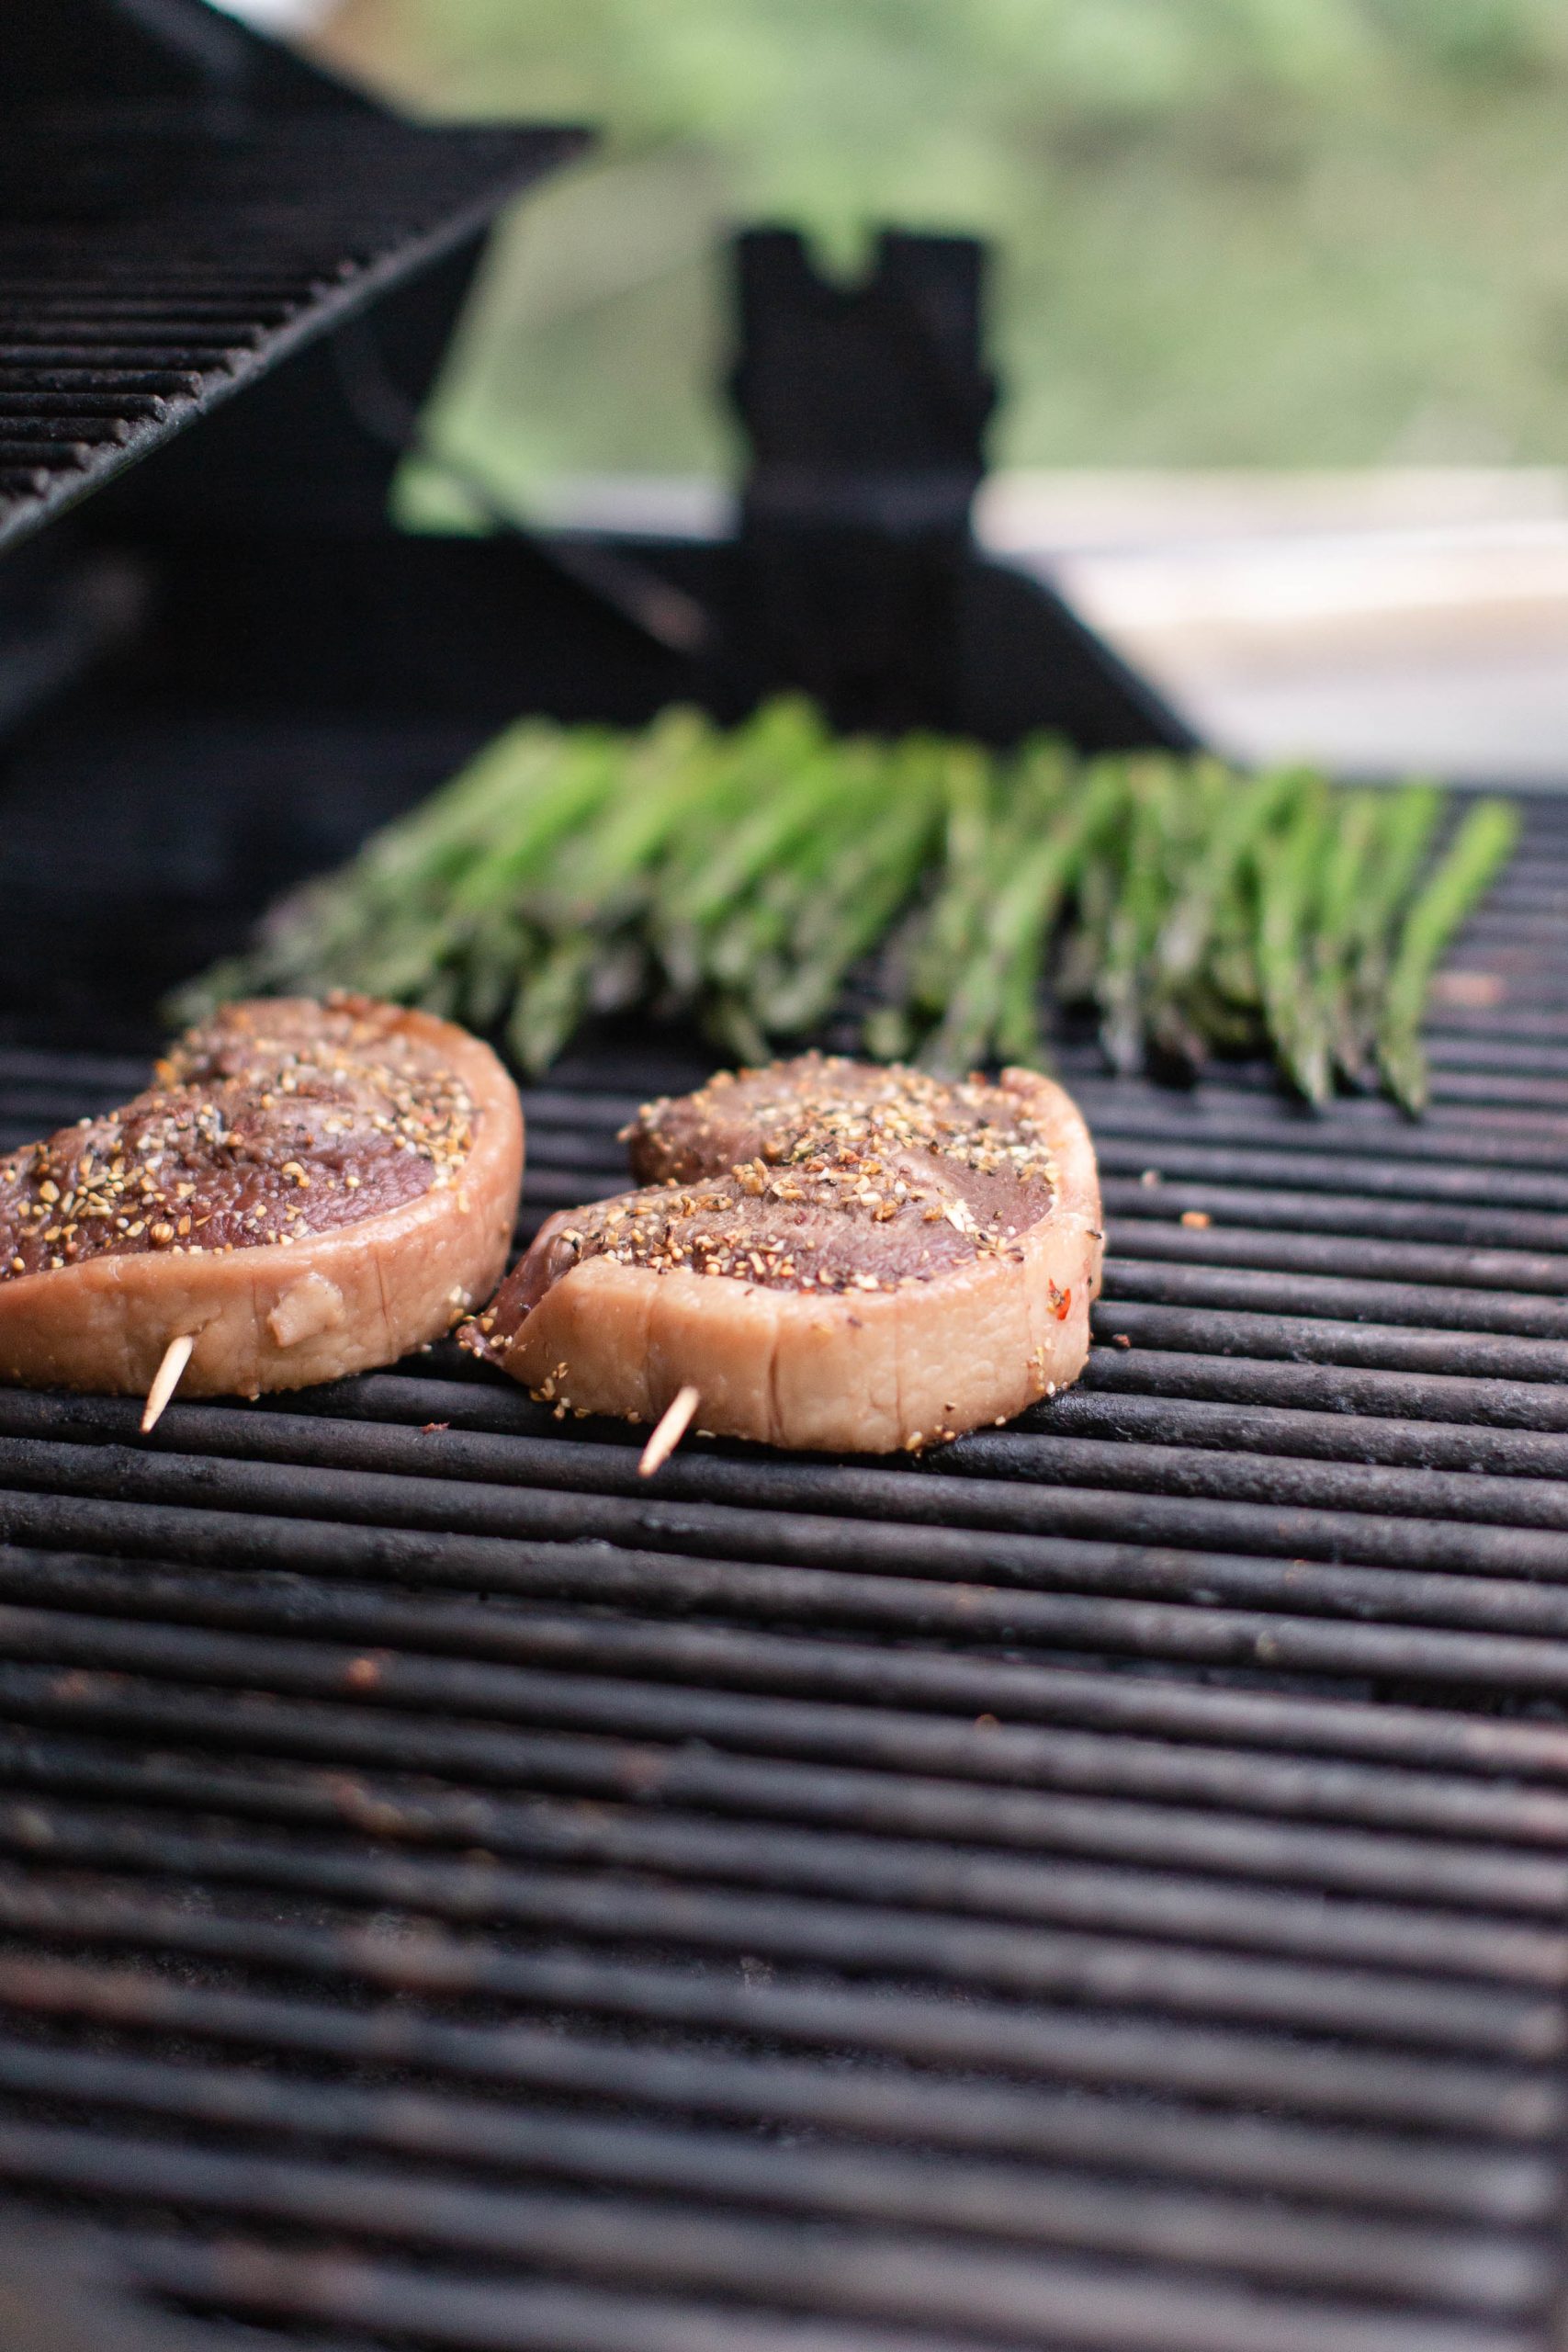 culotte steaks and asparagus on the grill